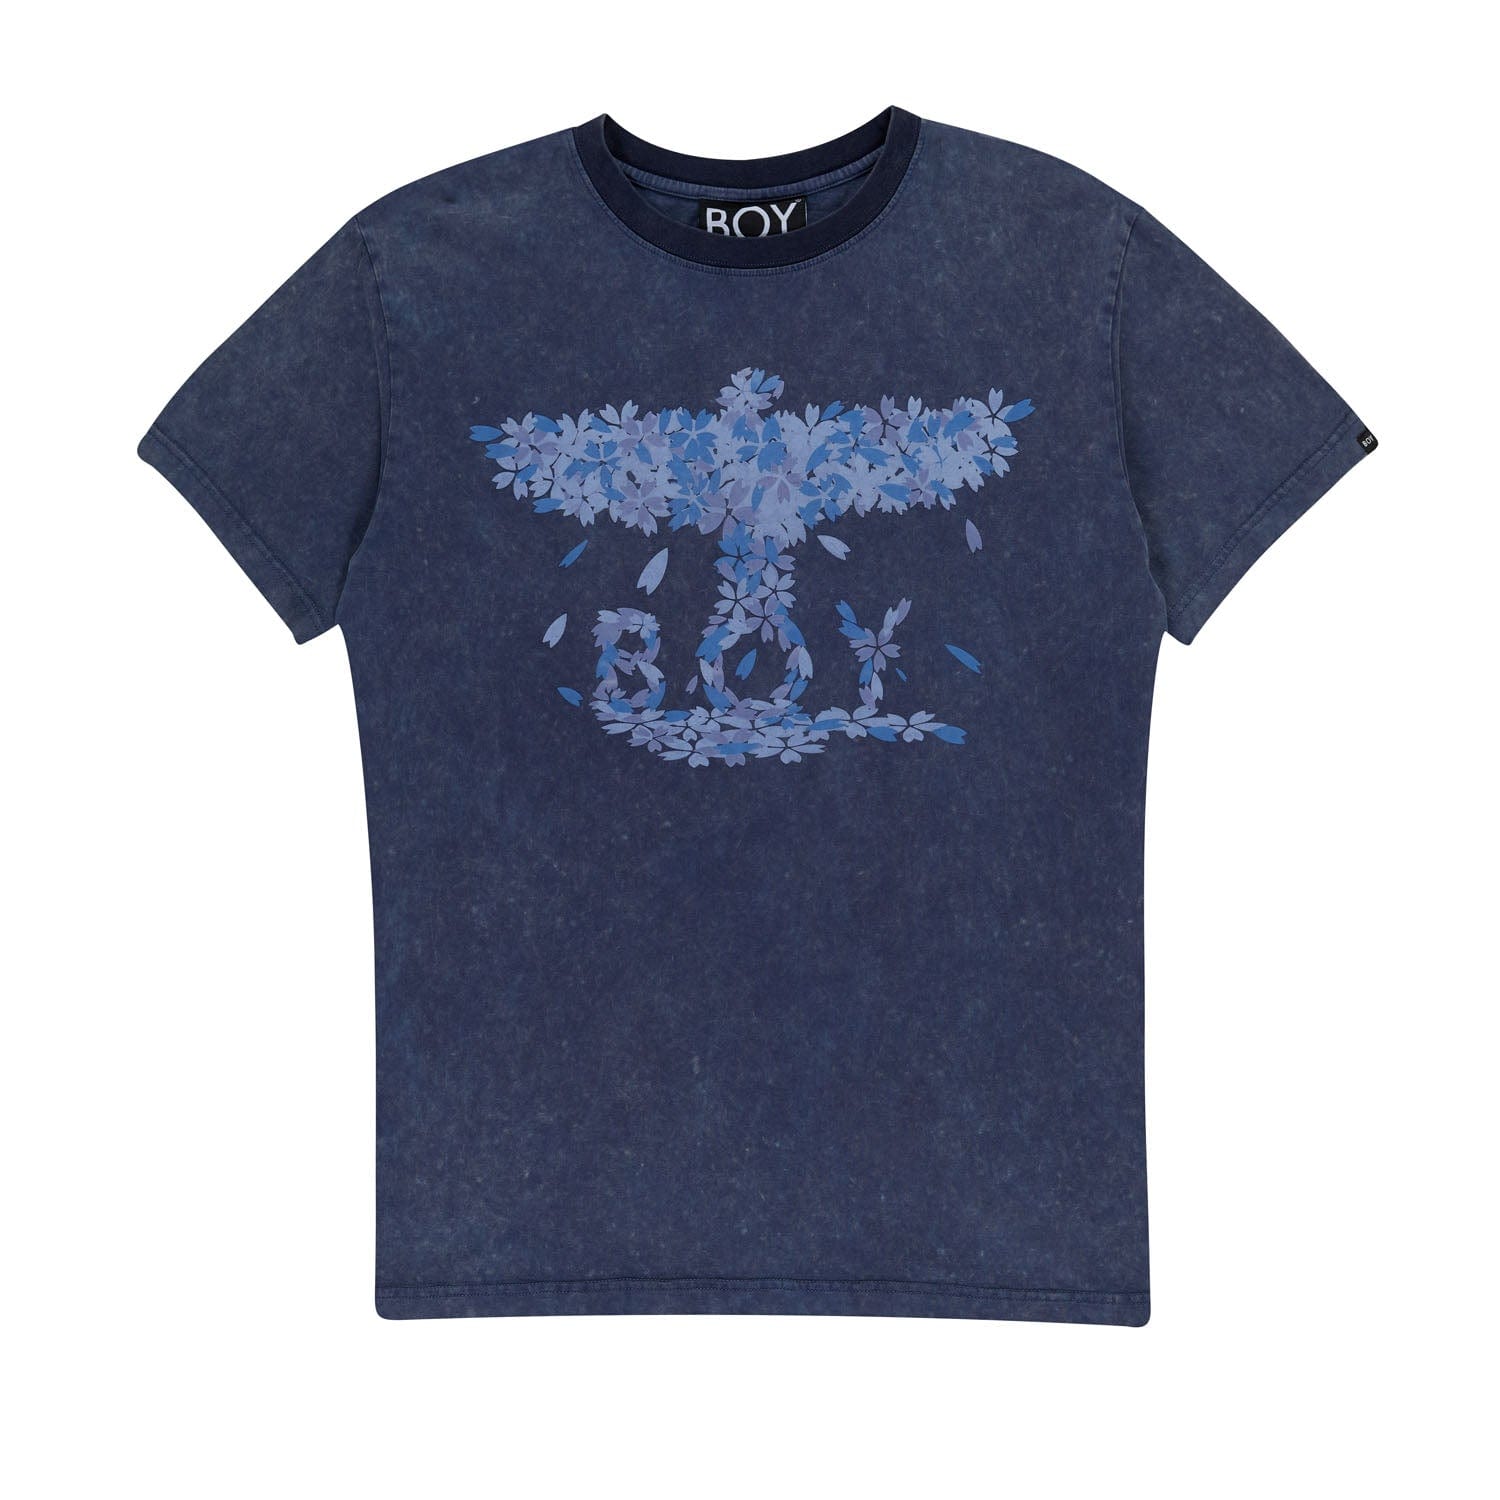 Image of BOY EAGLE BLOSSOM TEE - WASHED NAVY